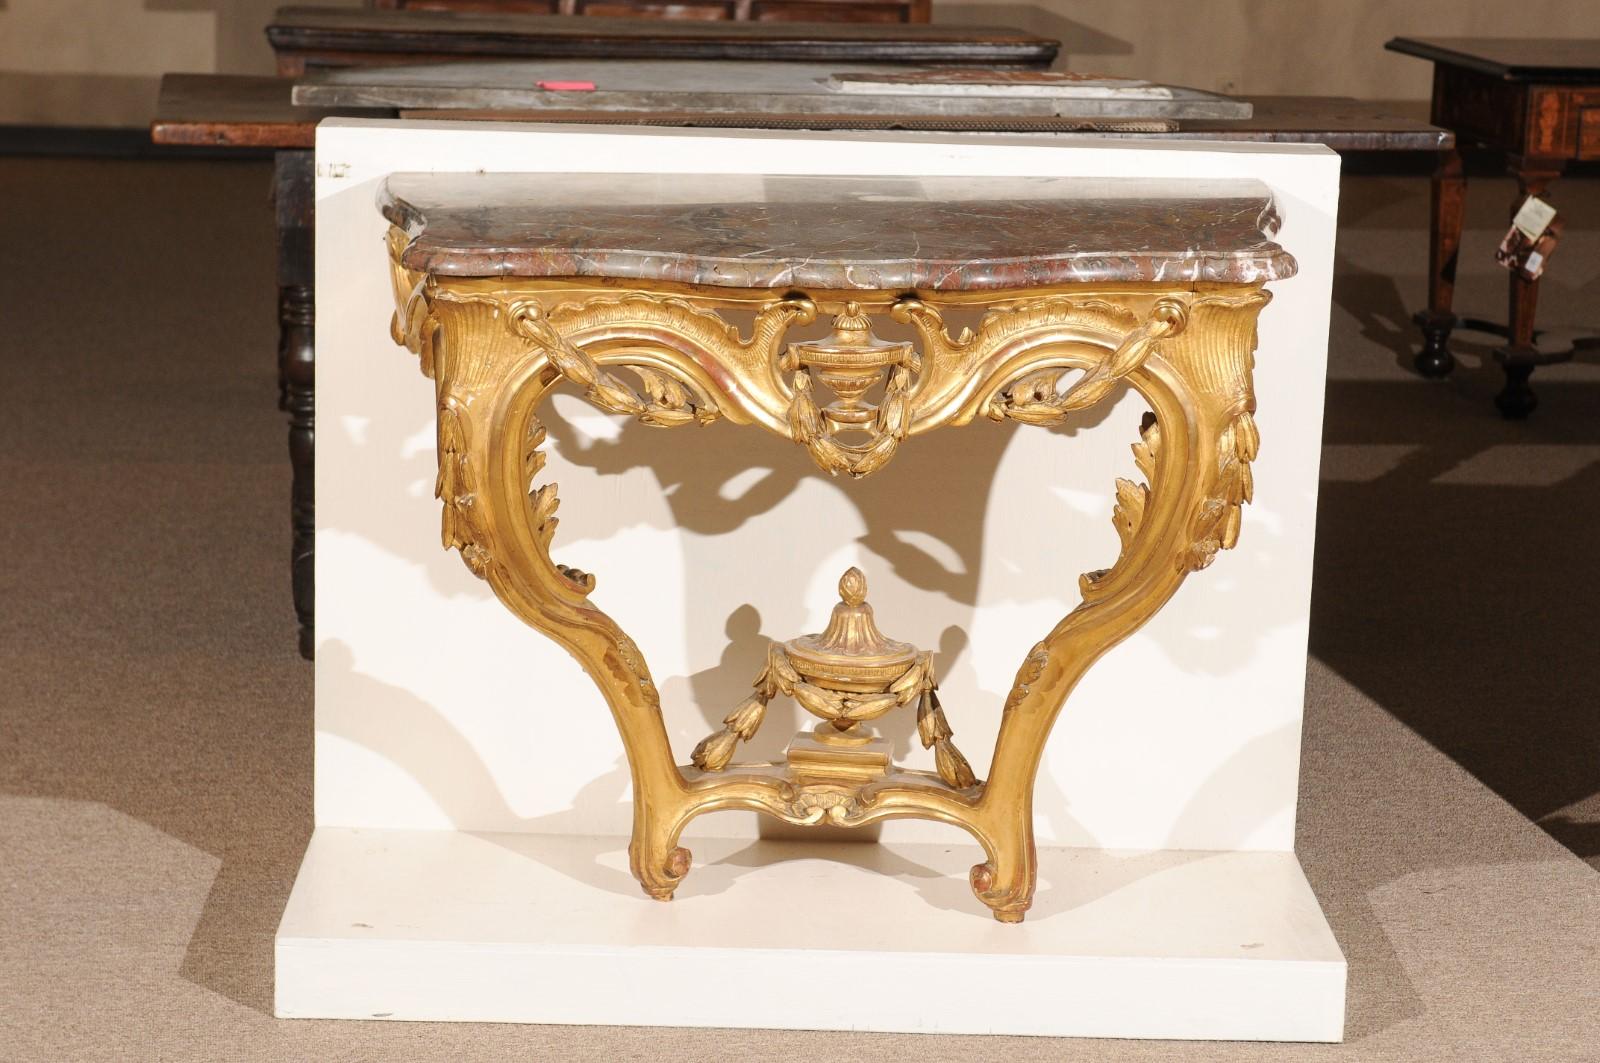 Transitional Louis XV/XVI wall-mounted giltwood console table with urn finial & marble top.